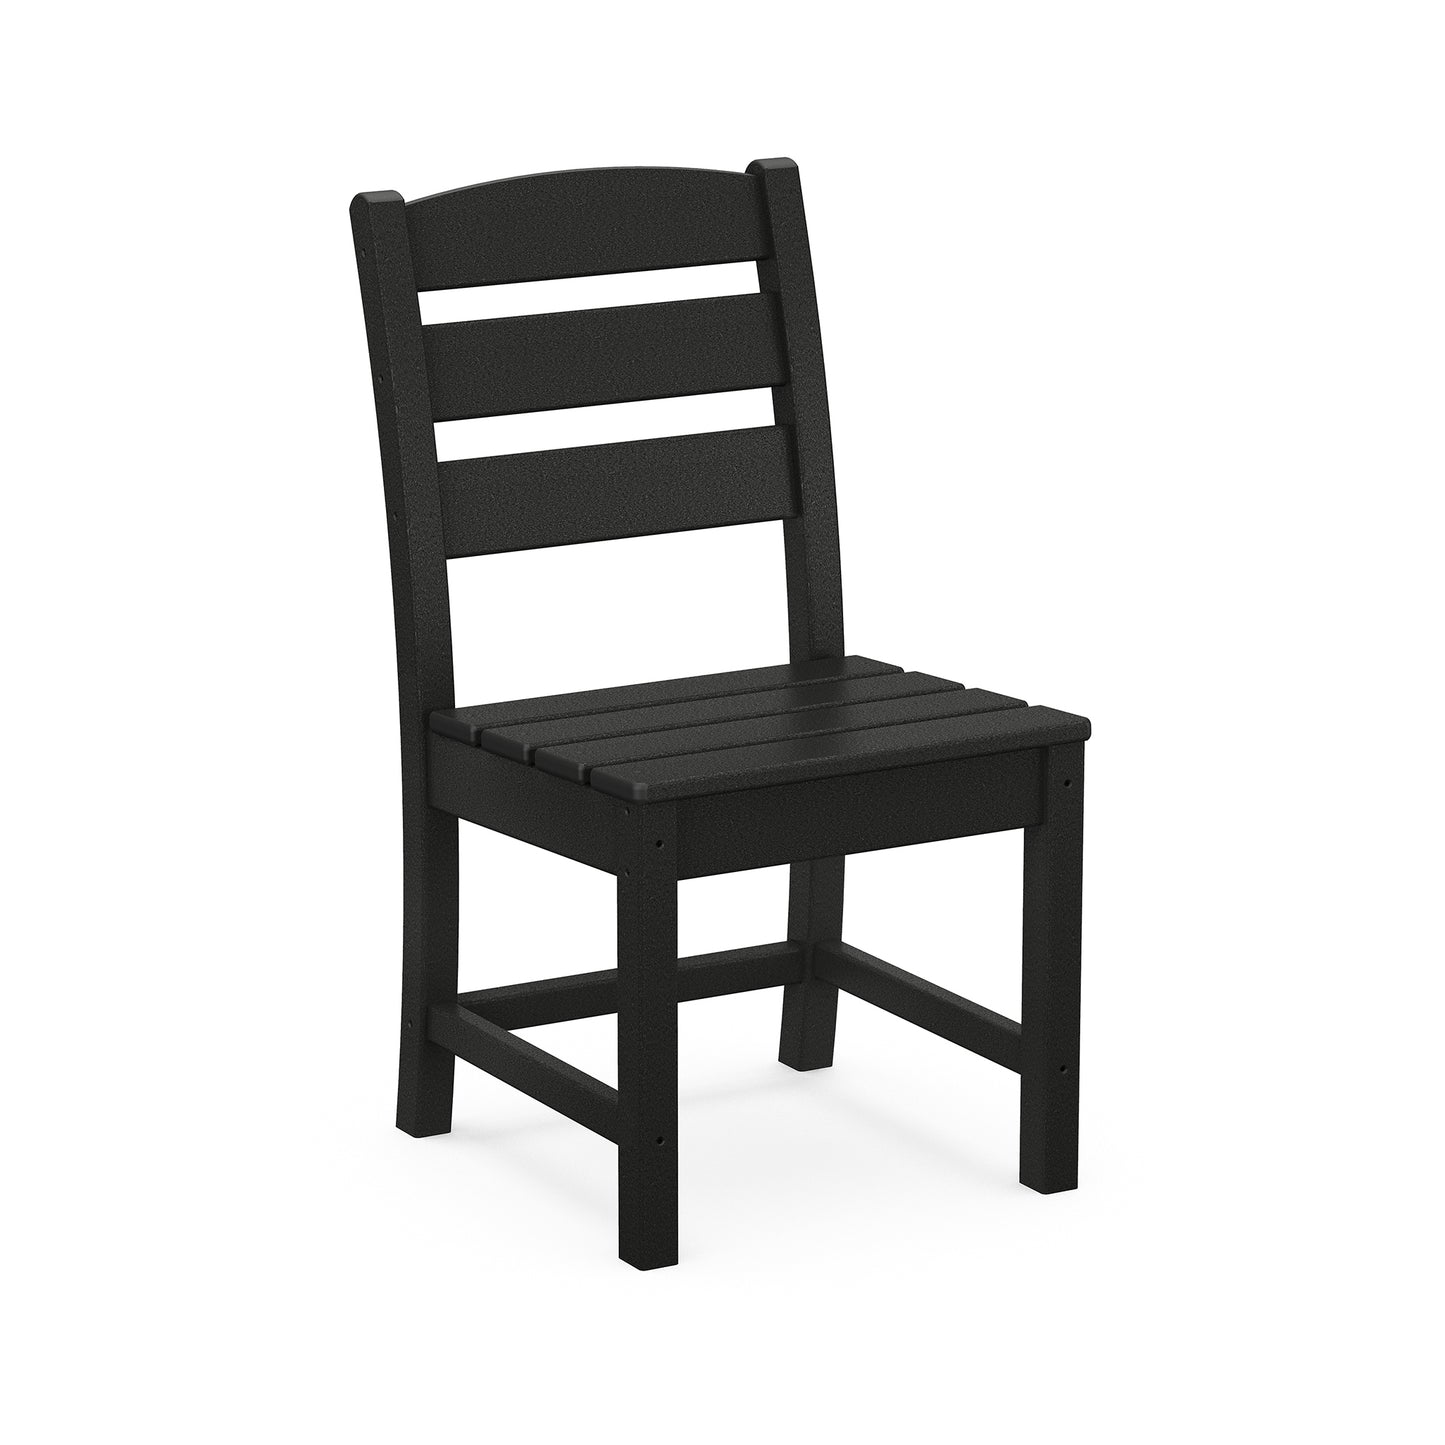 A simple black POLYWOOD® Lakeside Dining Side Chair with a straight back and horizontal slats, viewed against a white background. The chair is made of solid panels, likely plastic or painted wood.